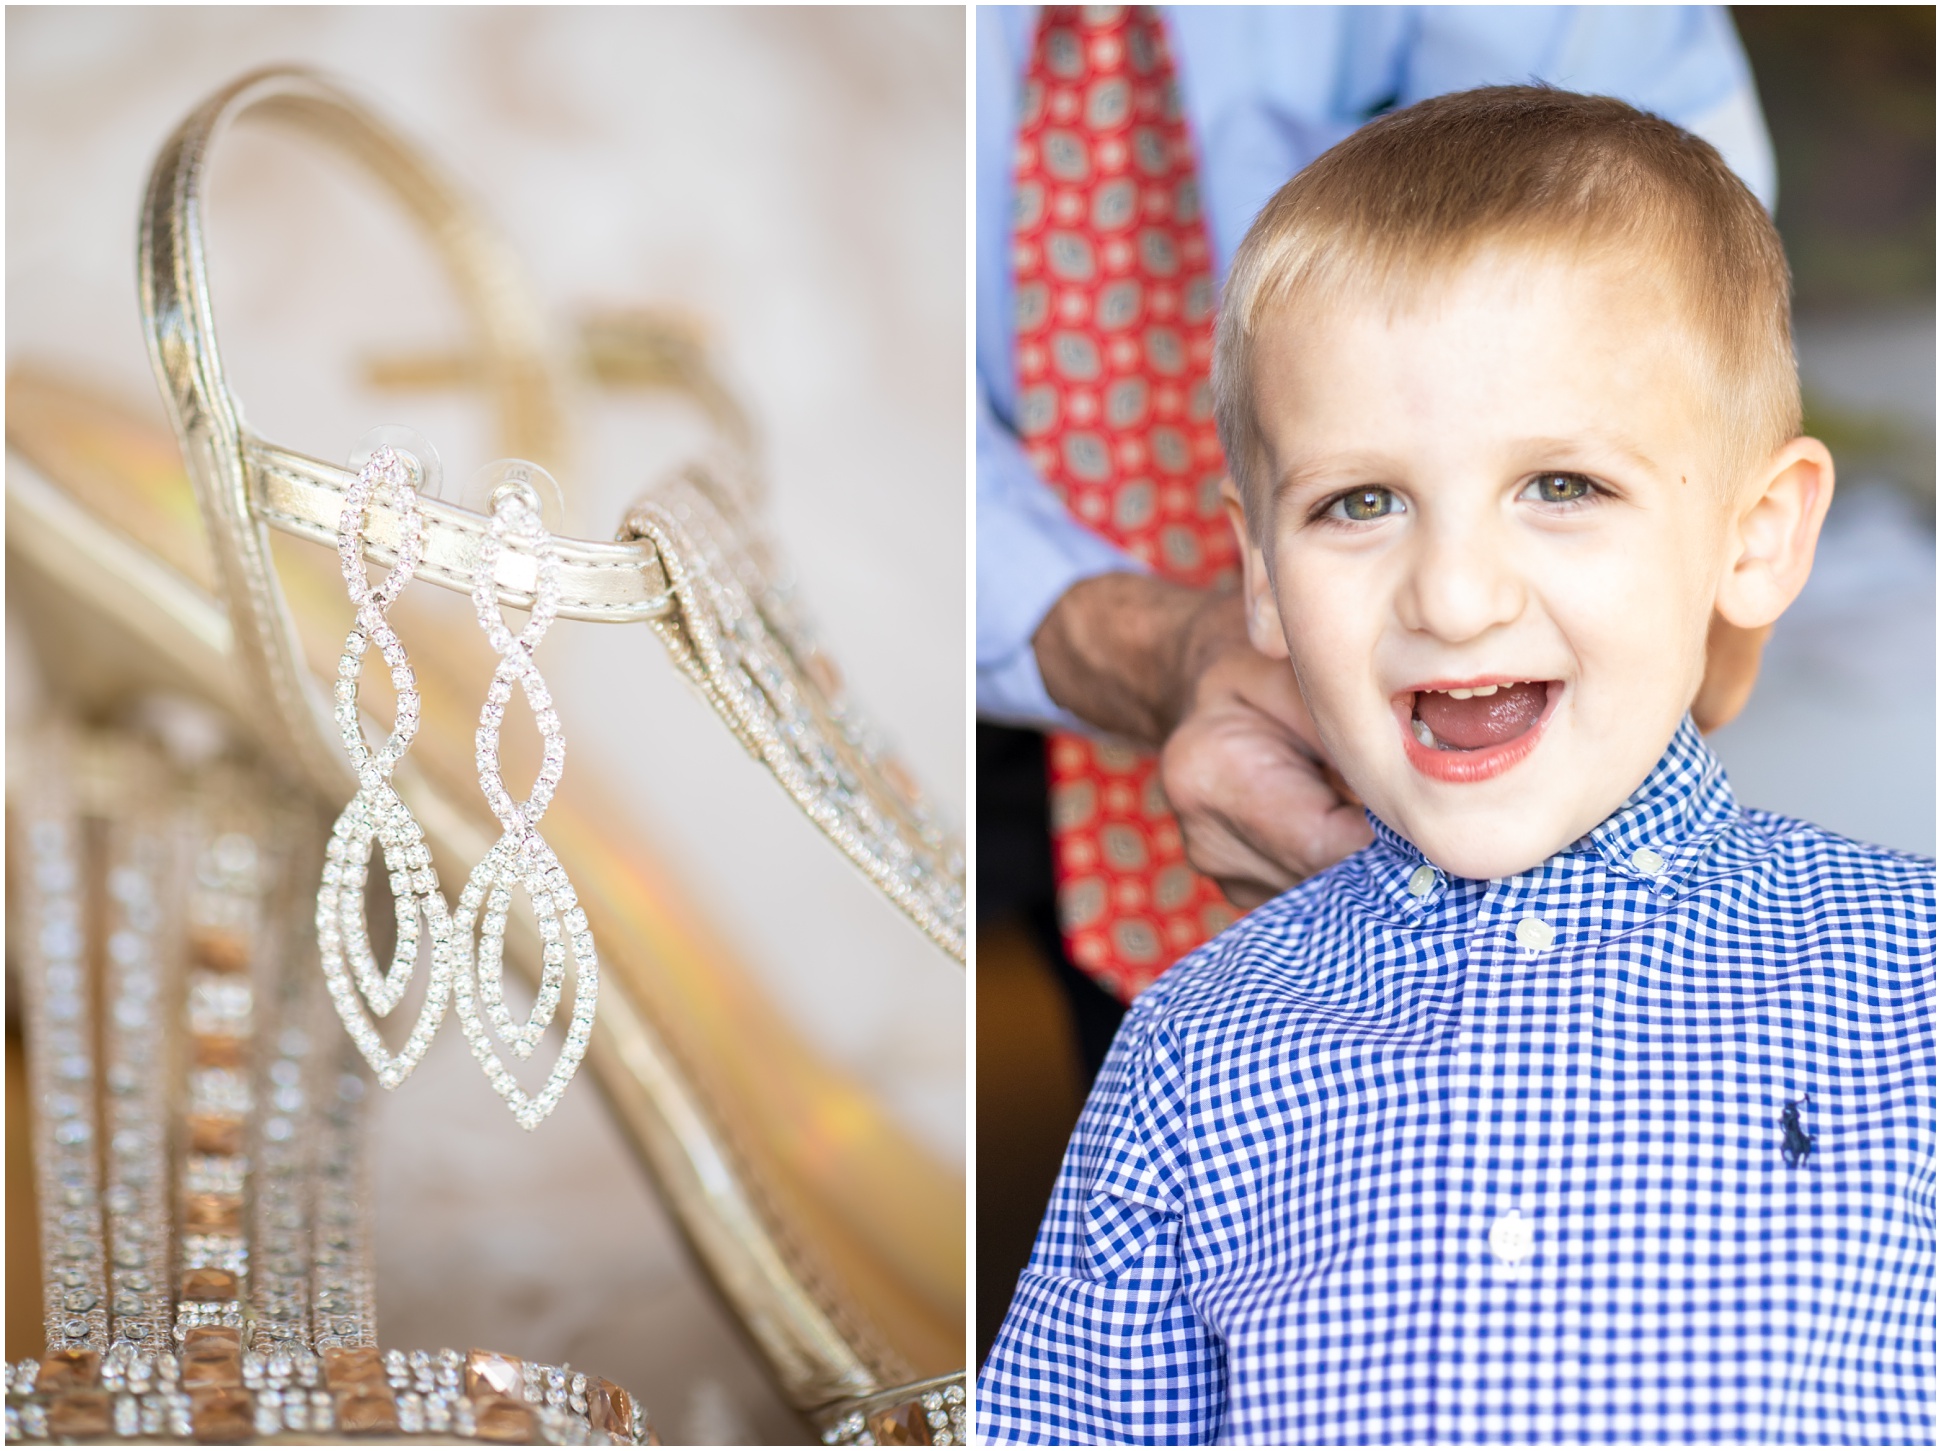 Left Image: Bride's sparkling teardrop earrings hanging from her shoes, Right Image: Groom's son getting ready with his grandfather